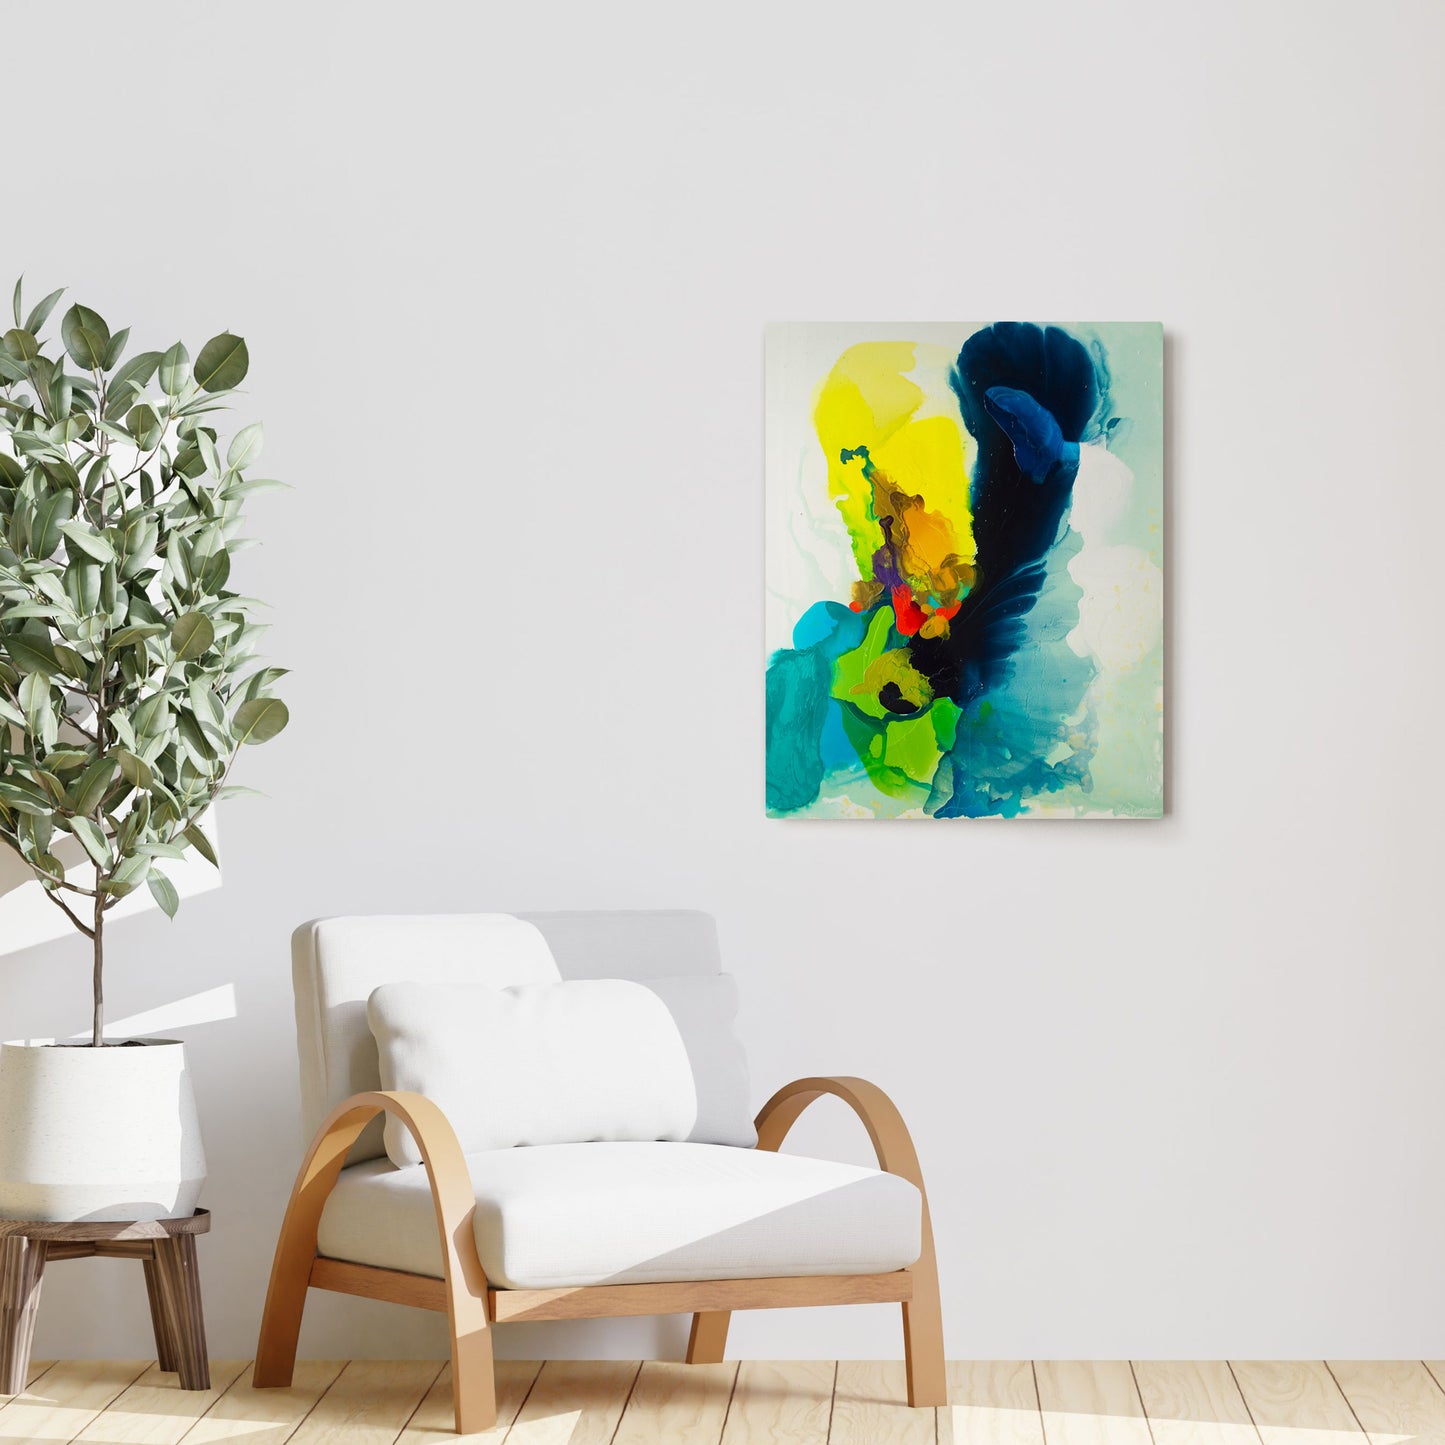 Claire Desjardins' Slow Motion painting reproduced on HD metal print and displayed on wall